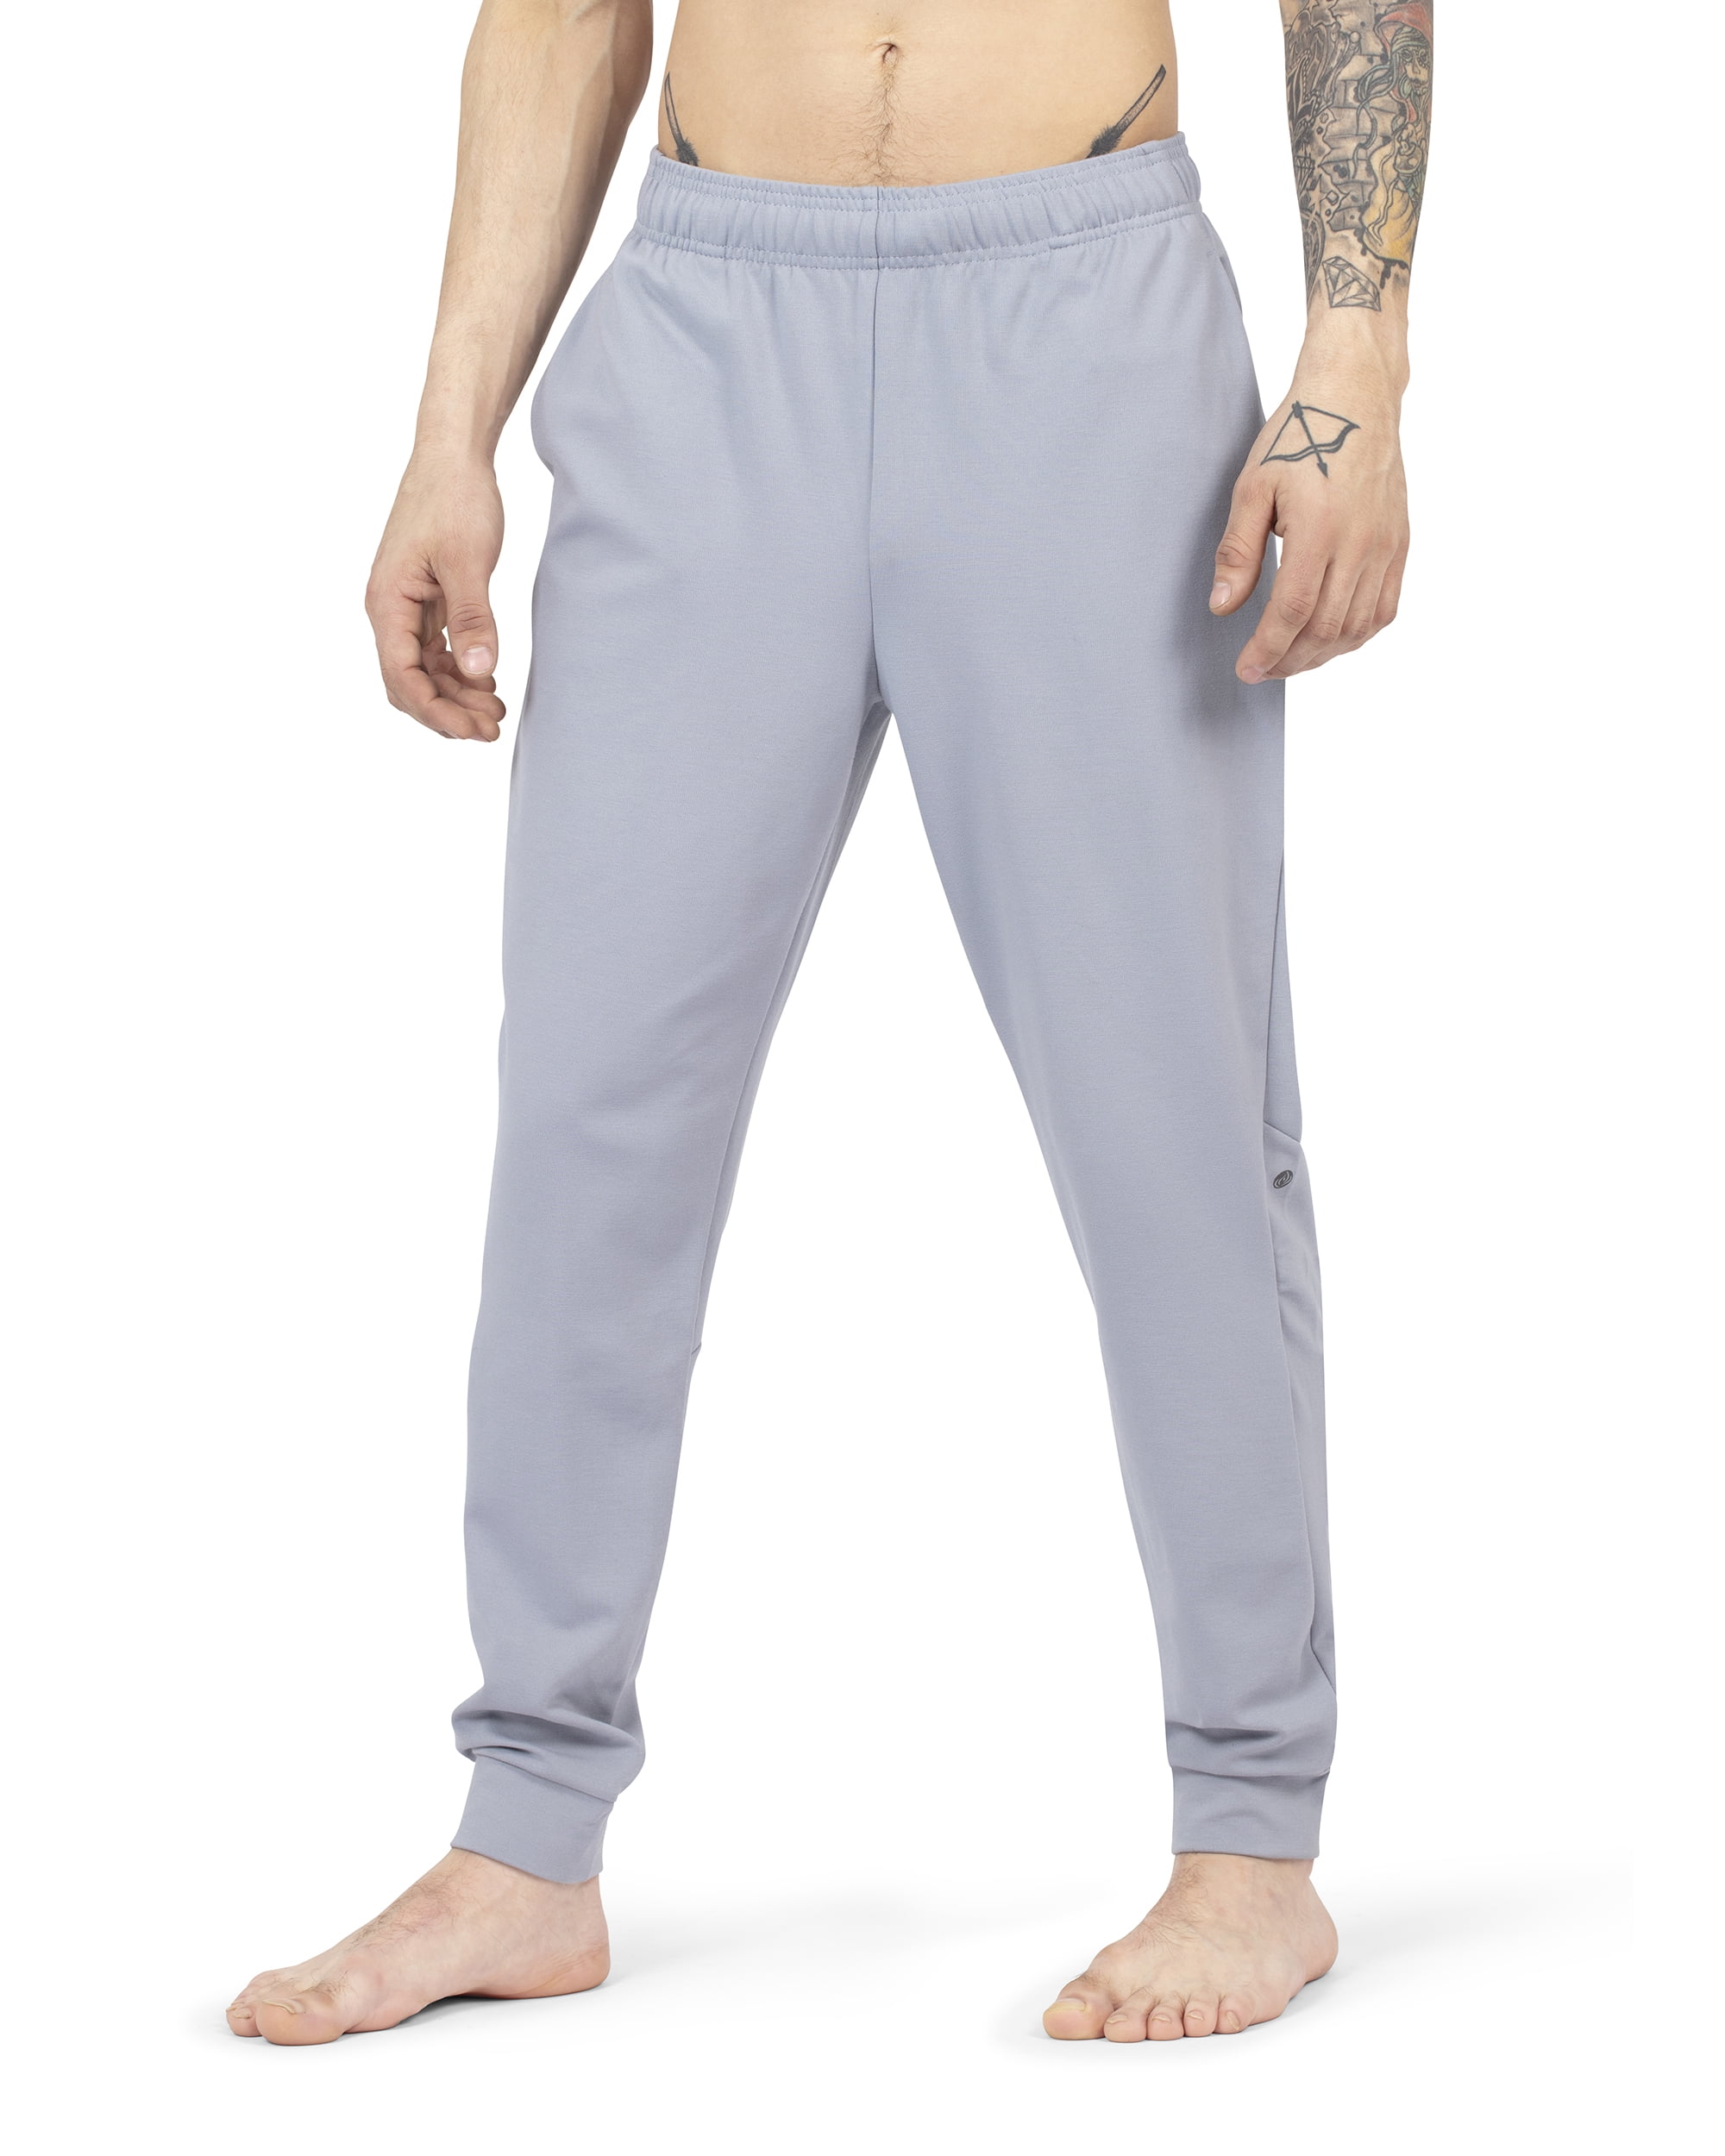 LAPASA Men's Sweatpants, Active Joggers with Pockets for Running